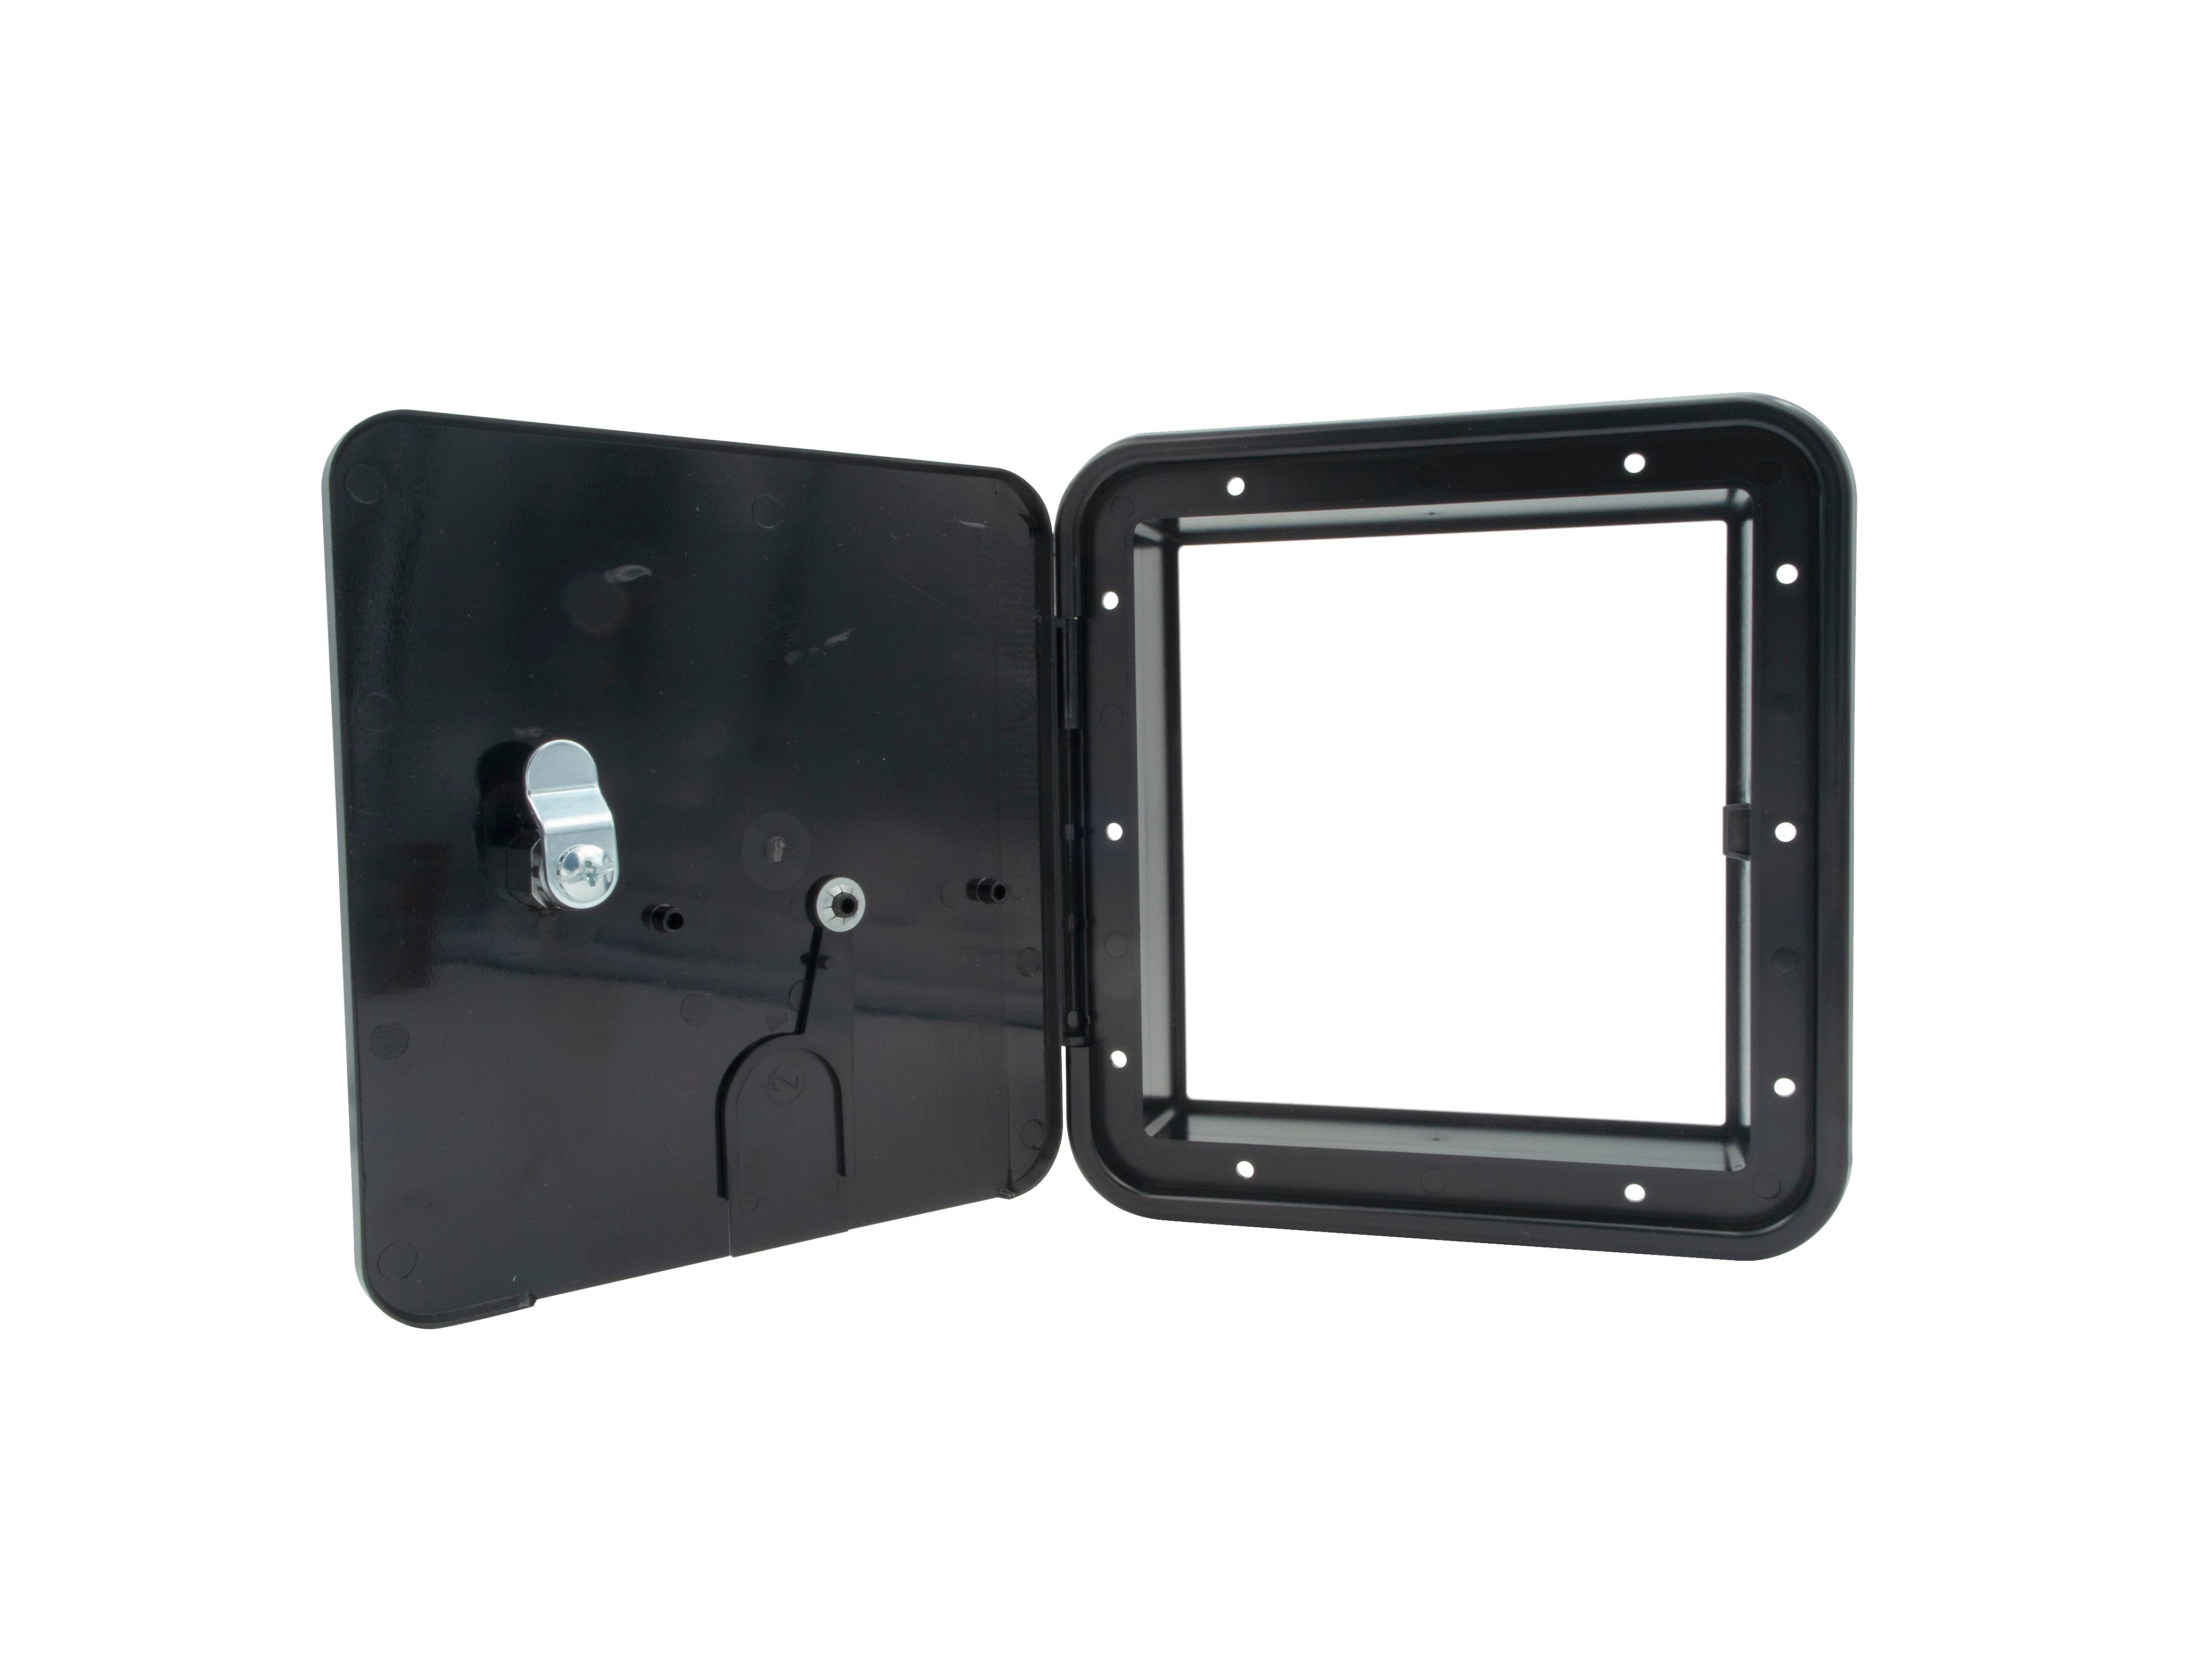 Thetford 94338 Large 30/50 Amp Electric Cable Hatch with Keyed Entry - Black